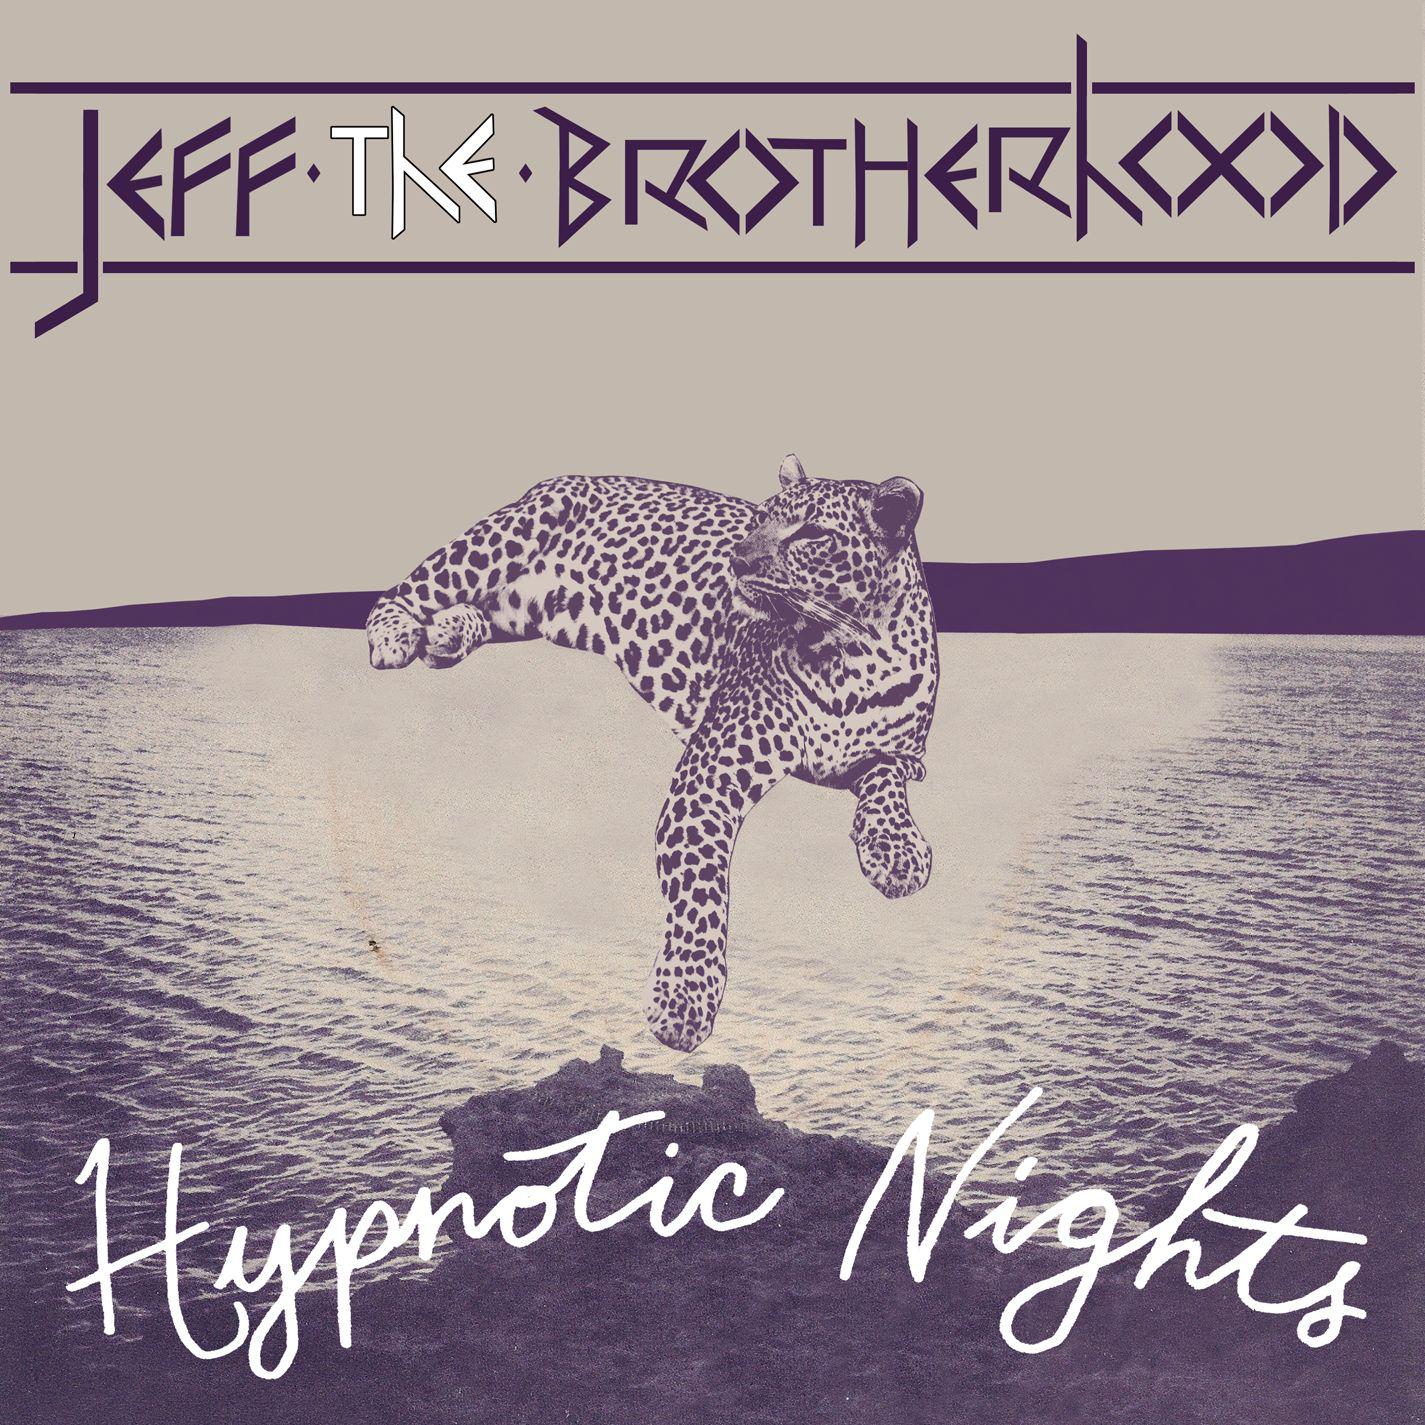 Jeff the Brotherhood - I'm a Freak (Wicked Lady - From Upstairs at United)